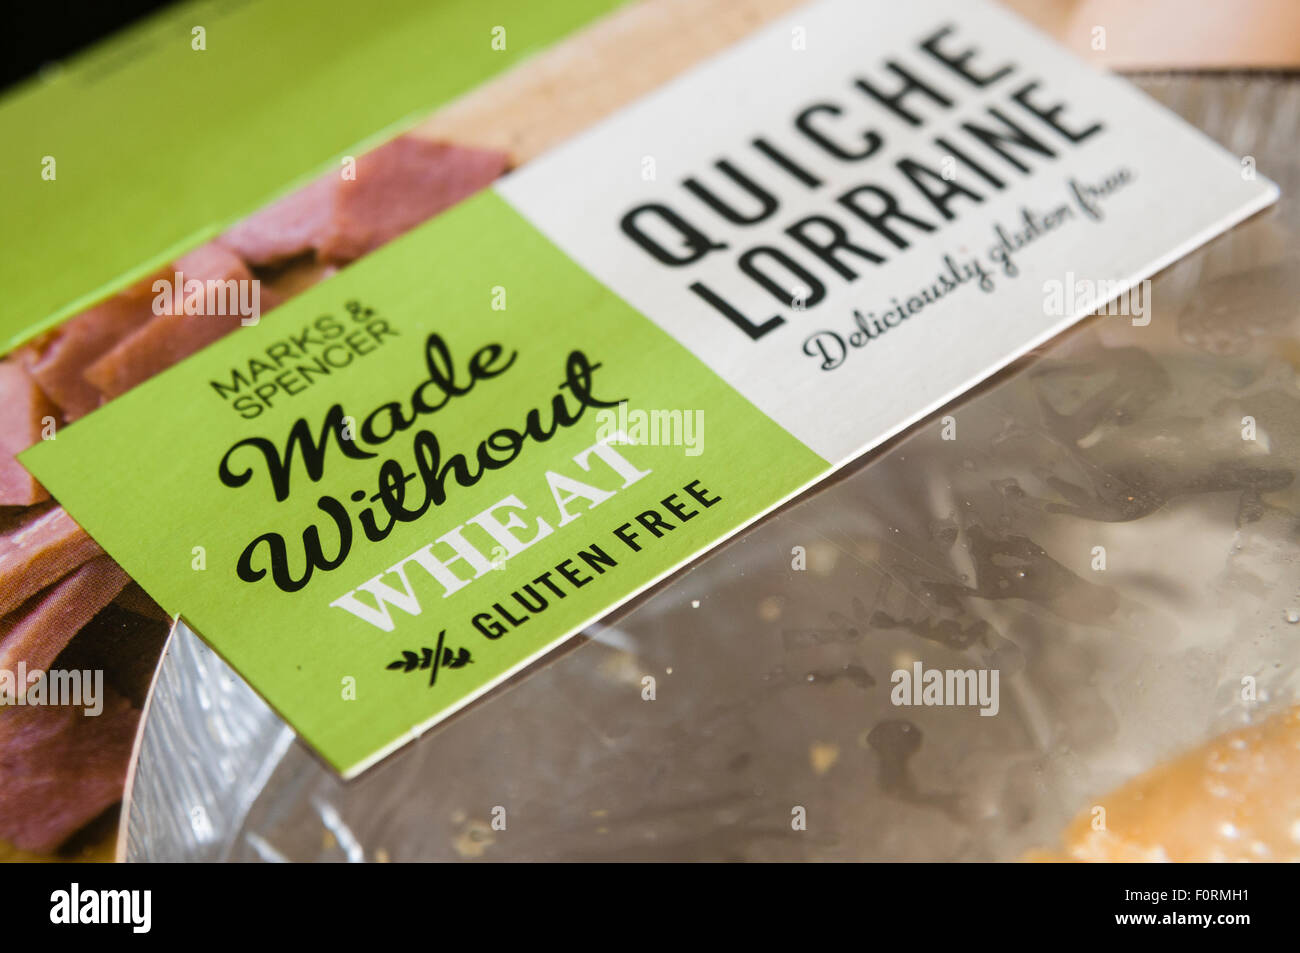 Gluten free quiche lorraine from Marks and Spencer's 'Made Without Wheat' range Stock Photo